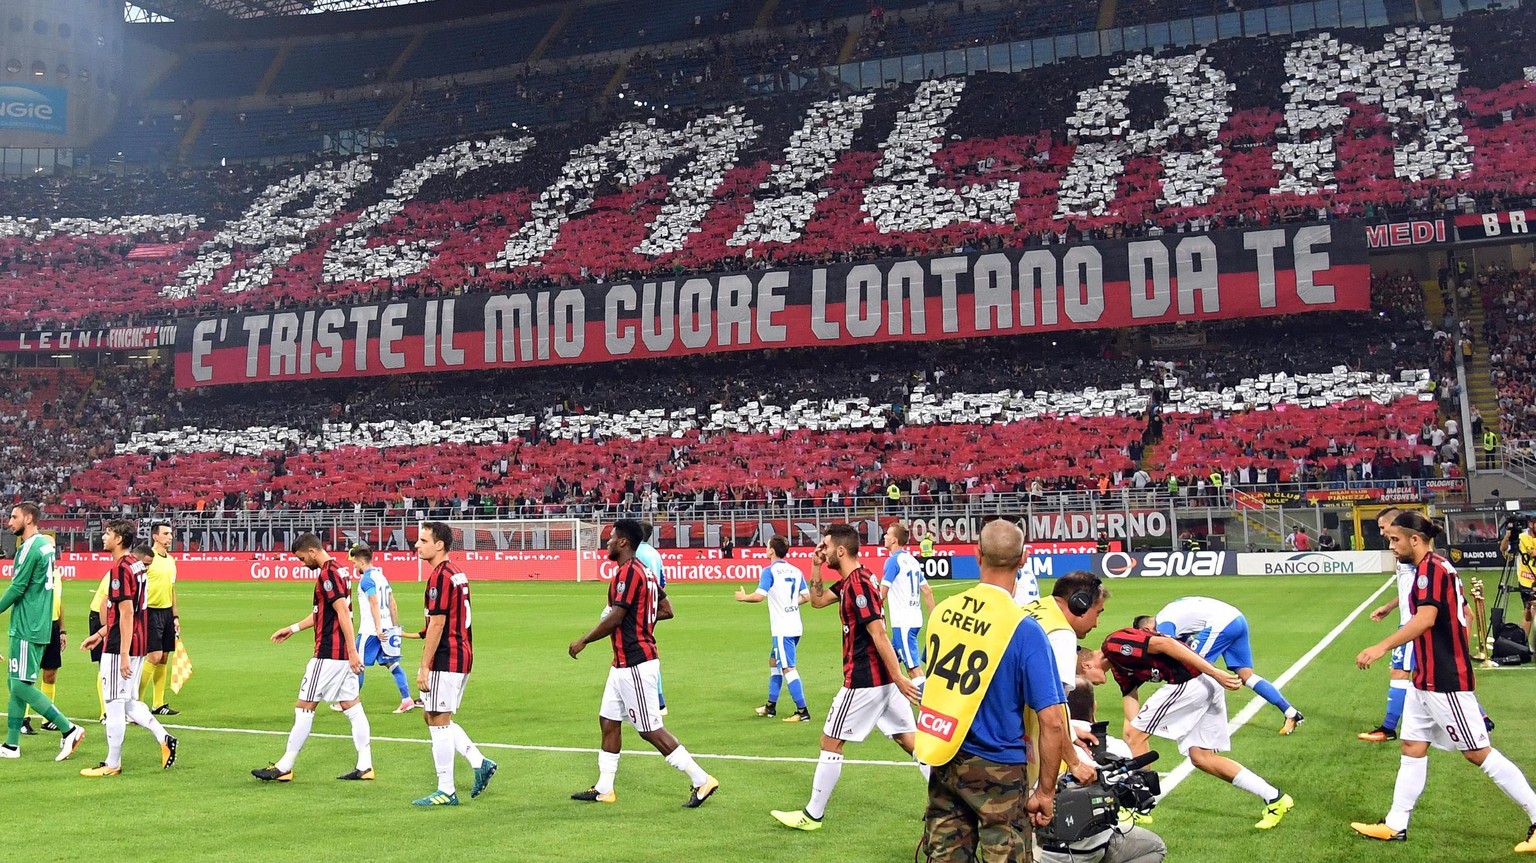 The stadium is crowded with some 65,000 fans as AC Milan and U Craiova enter the field for an Europa League third qualifying round, second leg, soccer match at the San Siro stadium in Milan, Italy, Th ...